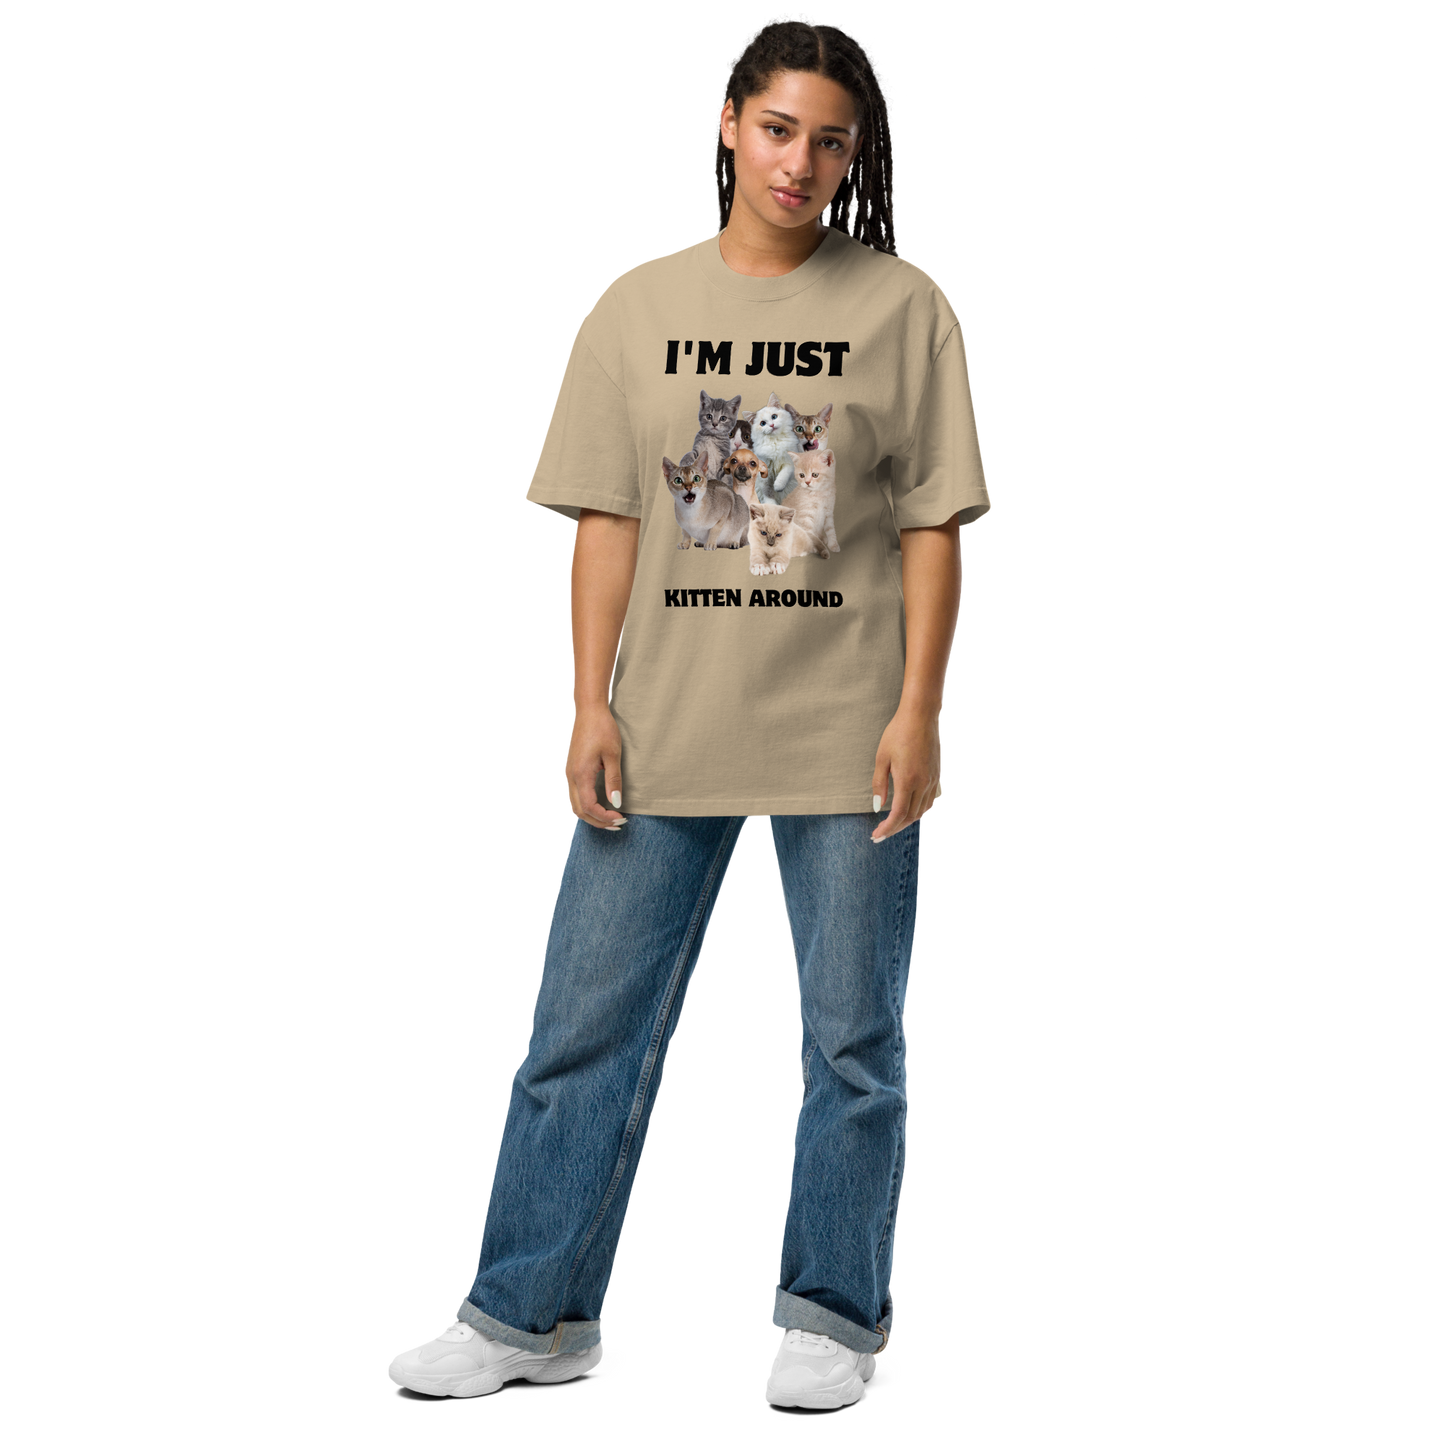 Woman wearing a Faded Khaki Cat Oversized T-Shirt featuring an I'm Just Kitten Around graphic on the chest - Funny Graphic Cat Oversized Tees - Boozy Fox